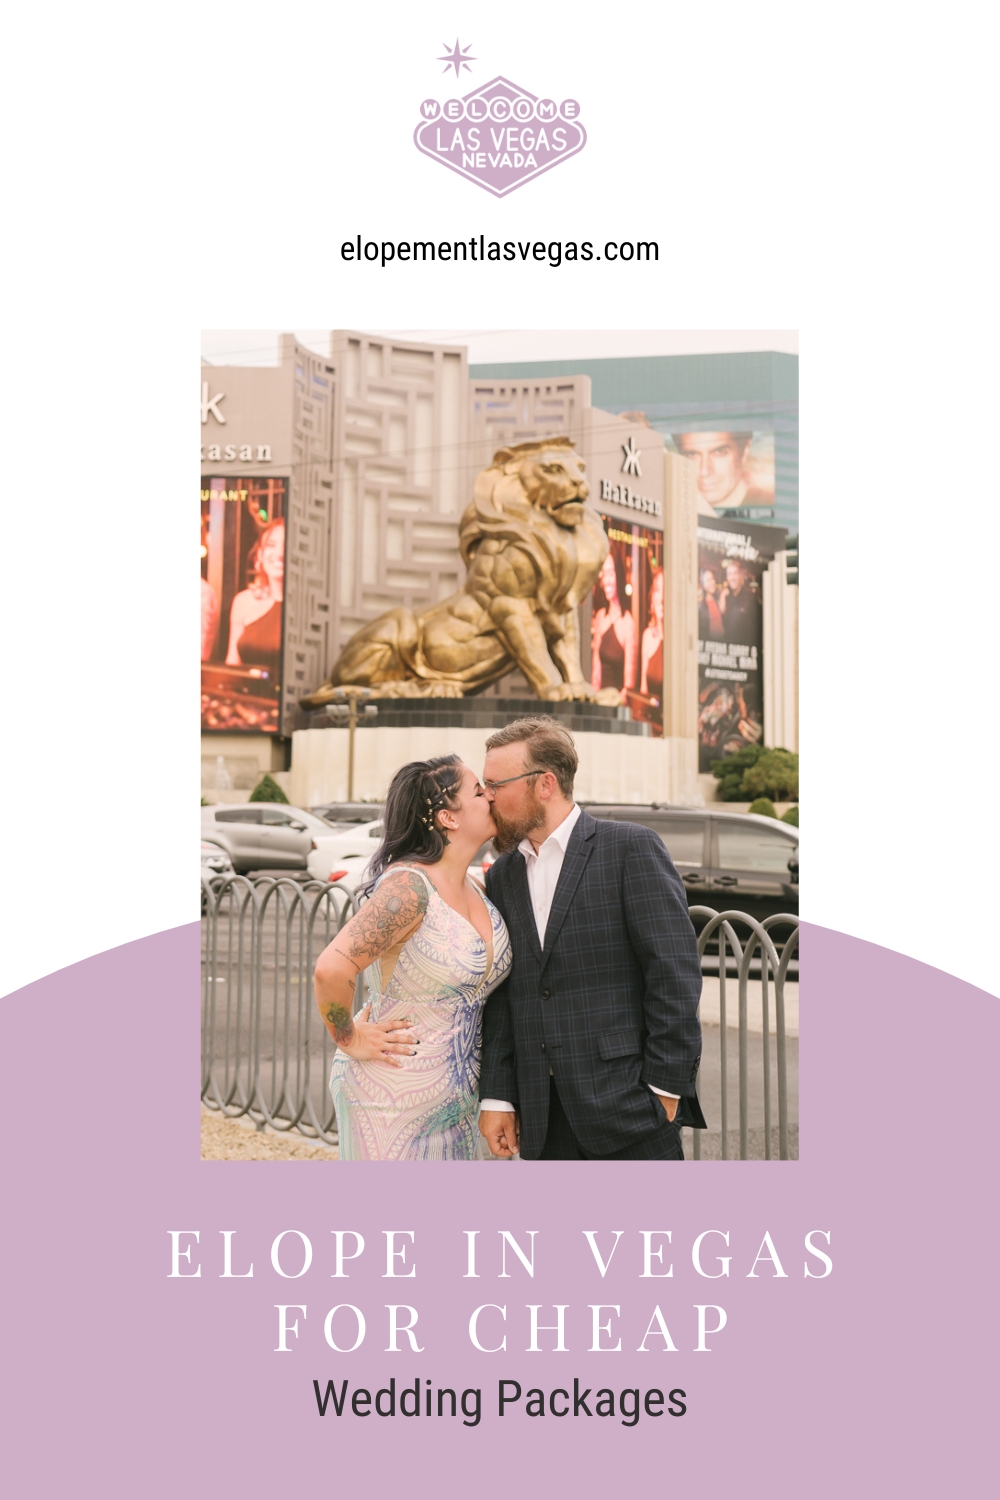 Bride and groom sharing a kiss during their Vegas elopement shoot; image overlaid with text that reads Elope in Vegas For Cheap Wedding Packages
